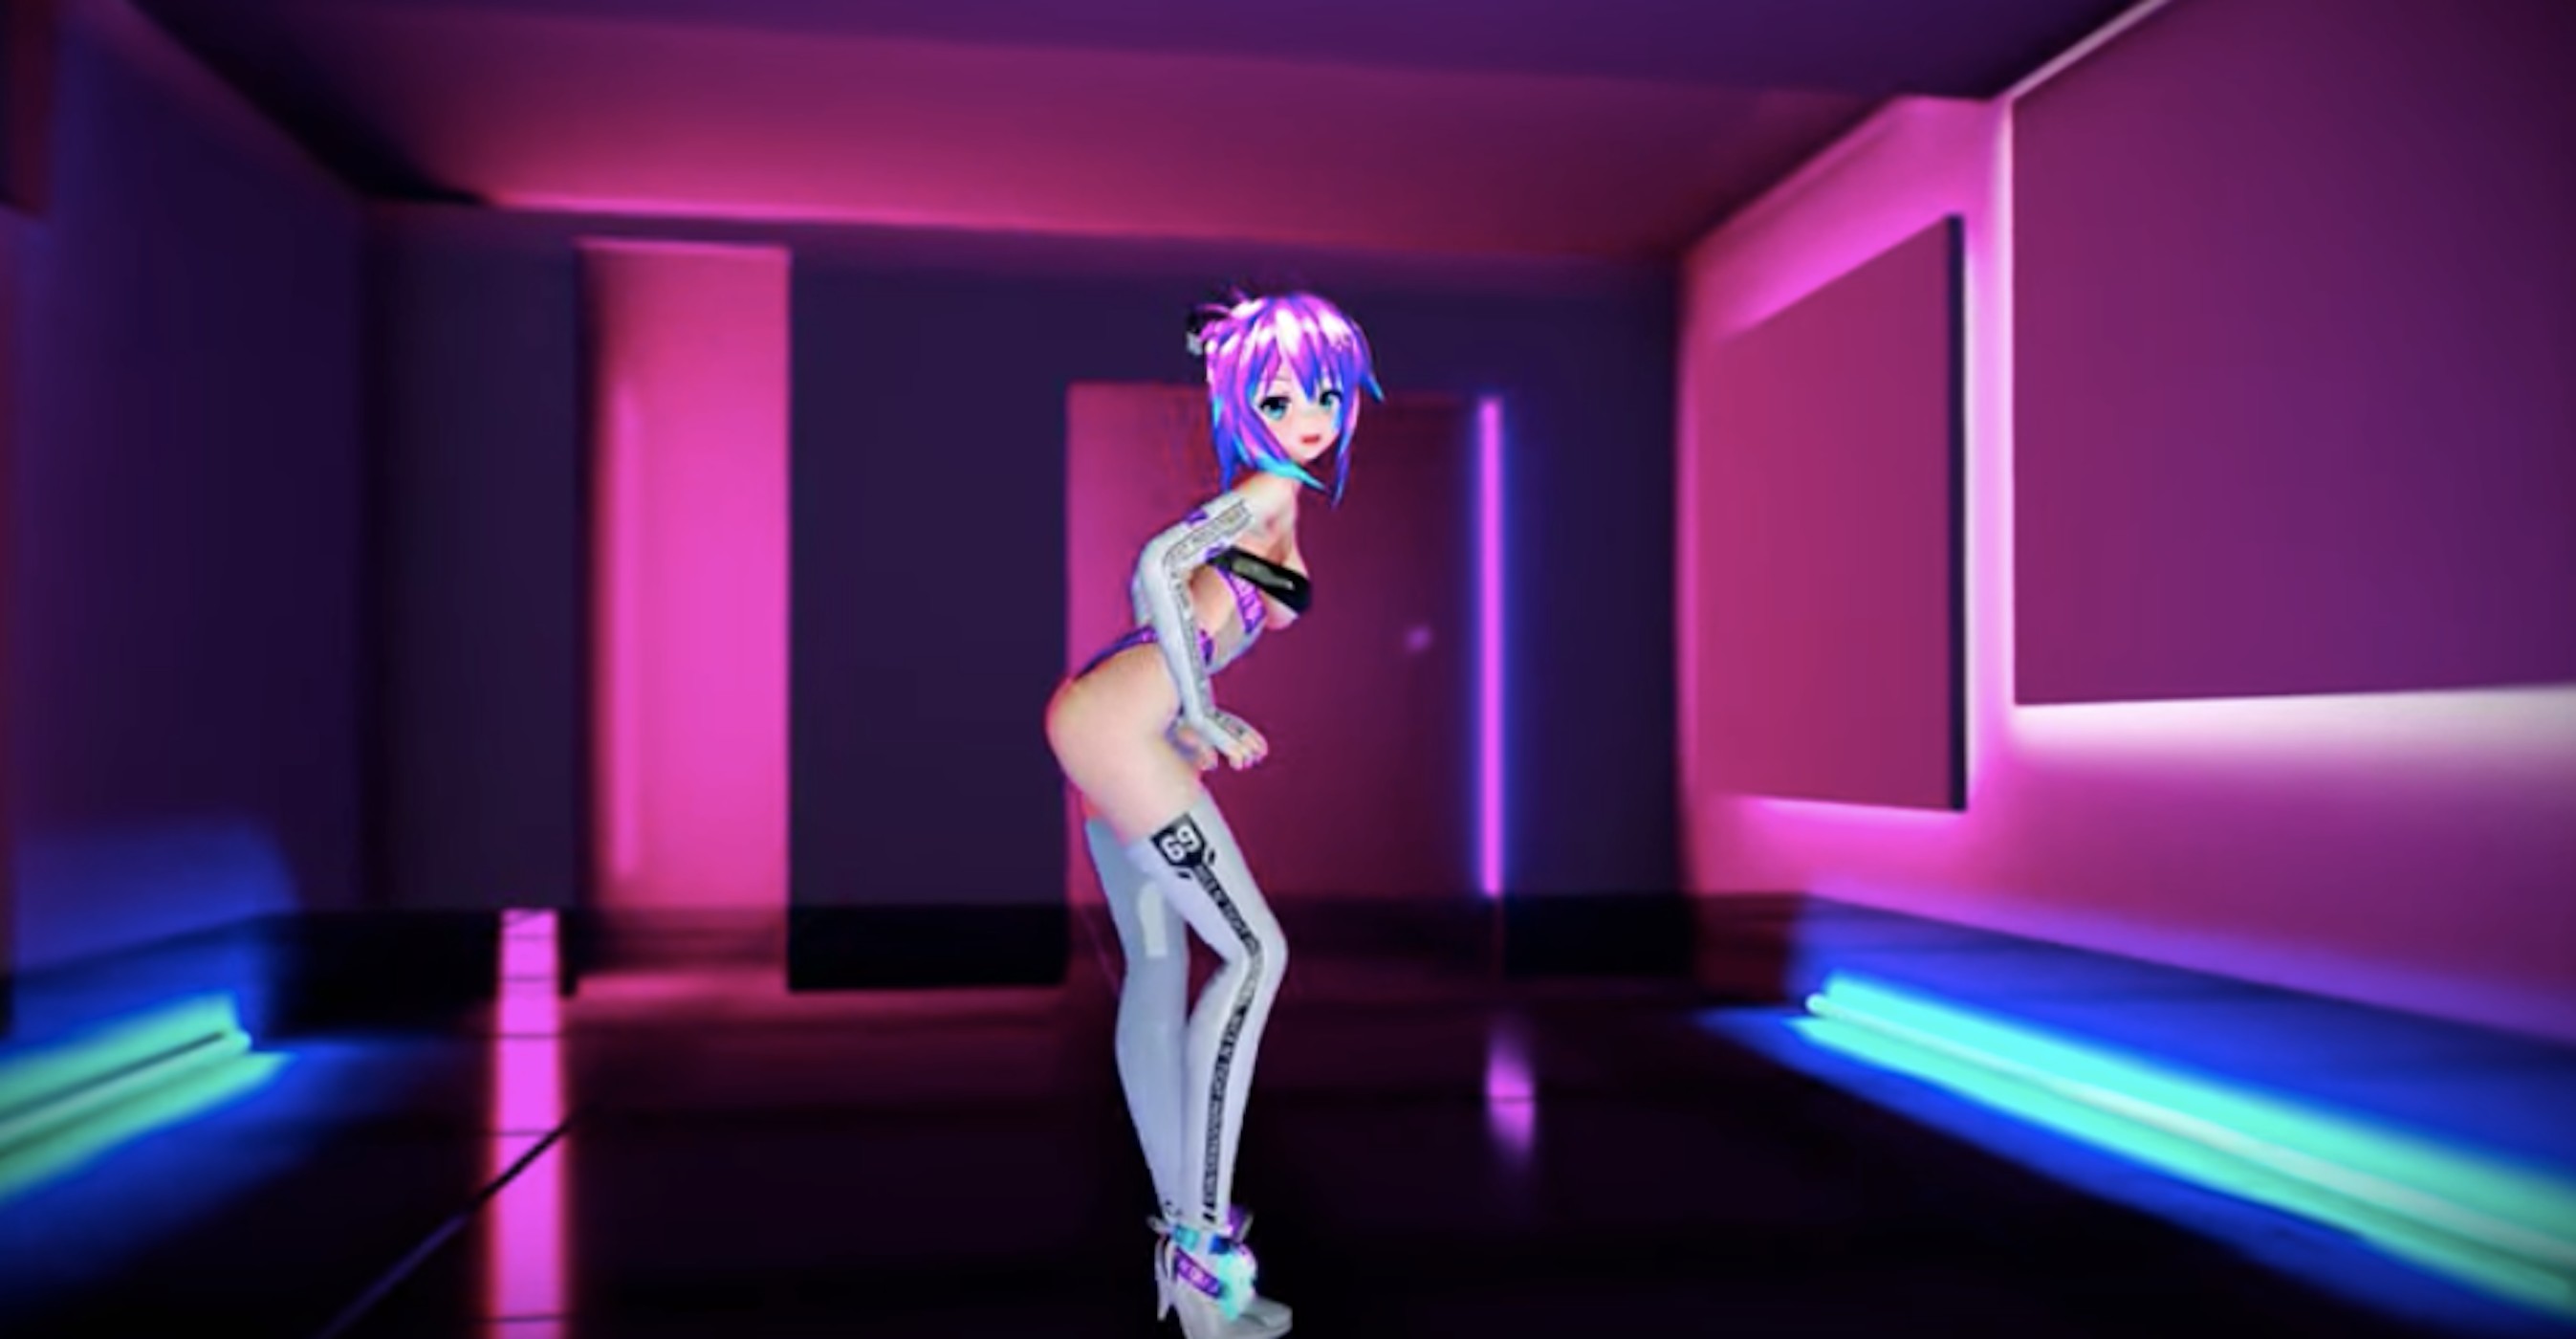 3d Anime Avatar Porn - A 3D Hentai Camgirl Is Taking Over Chaturbate, and Human Models Are Worried